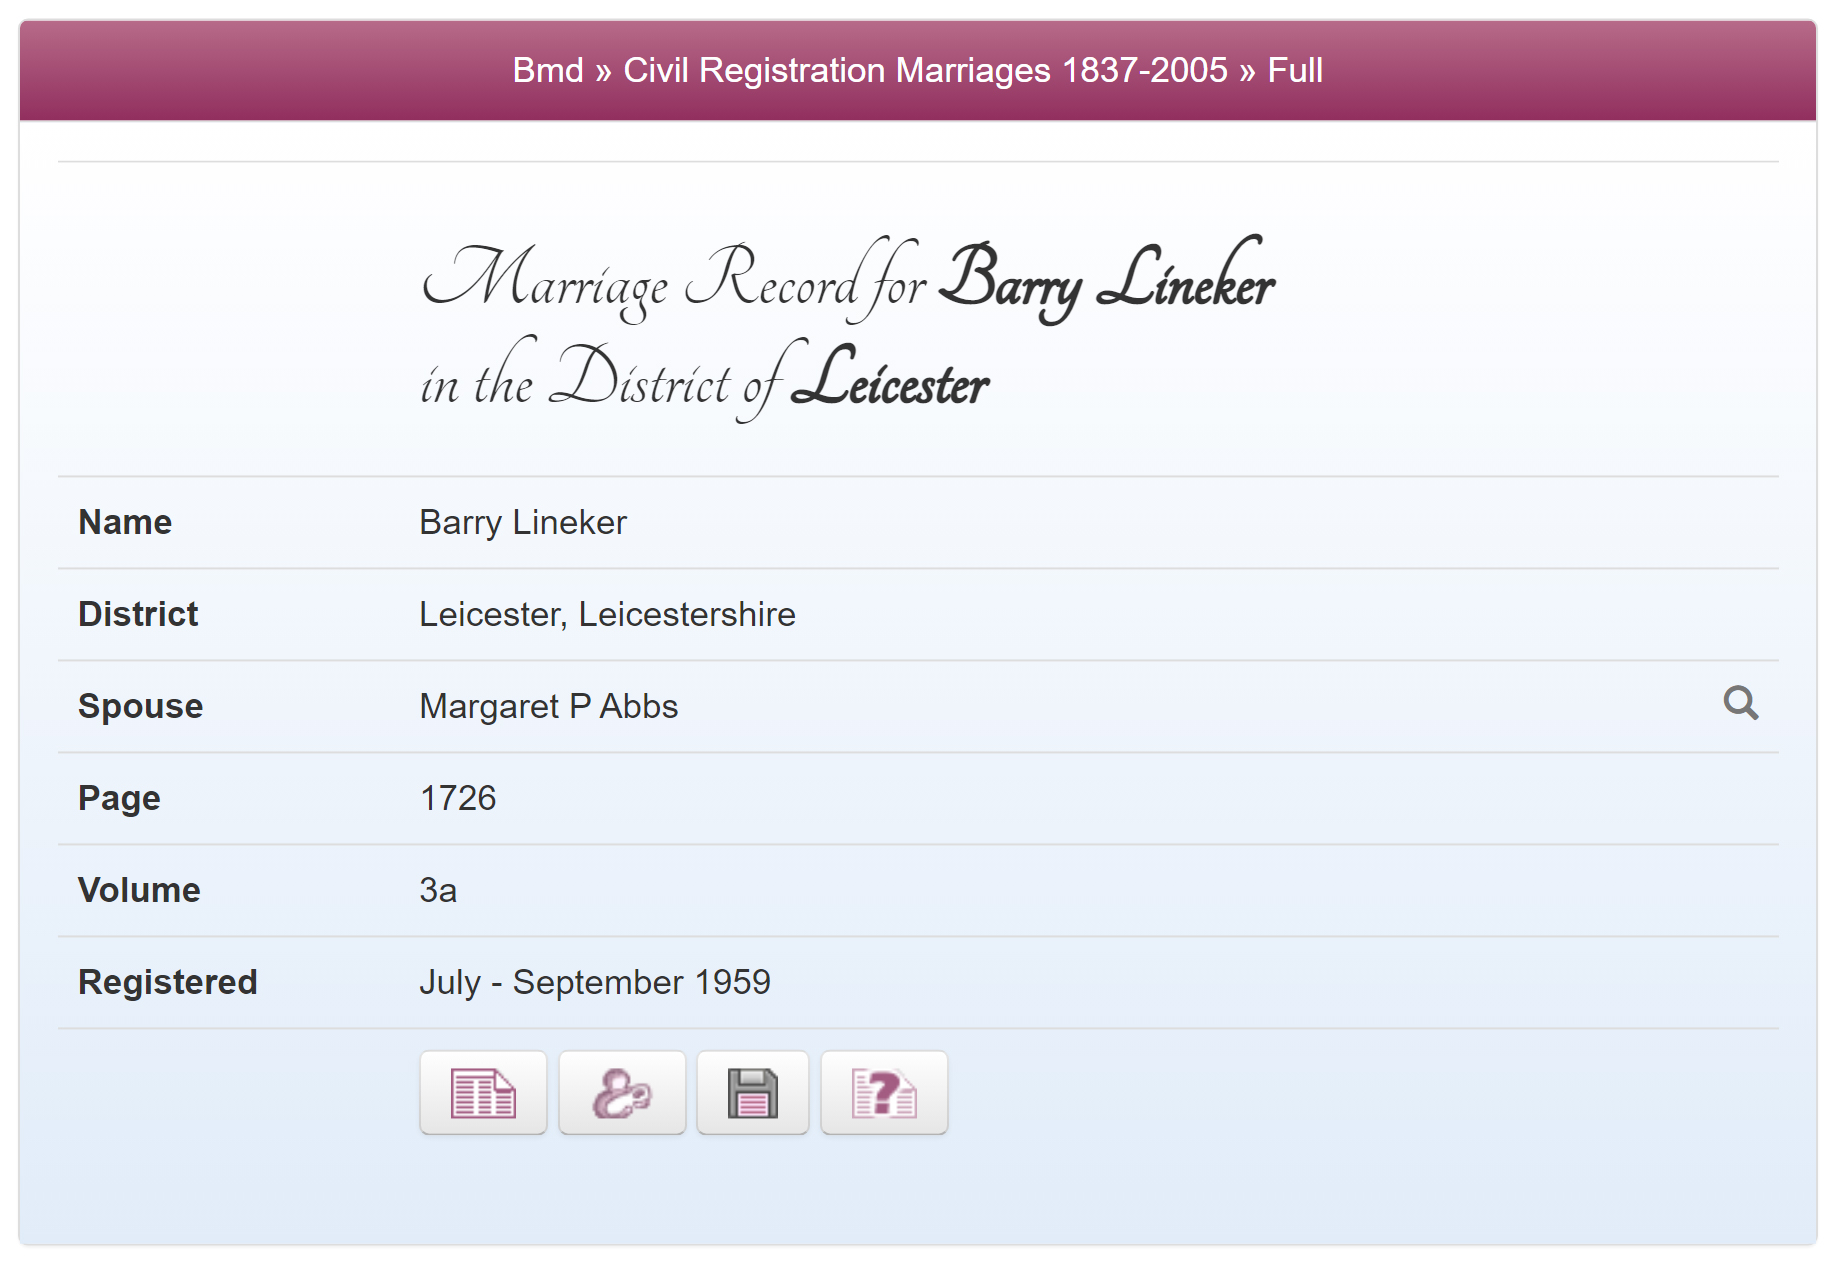 Barry and Margaret's marriage record